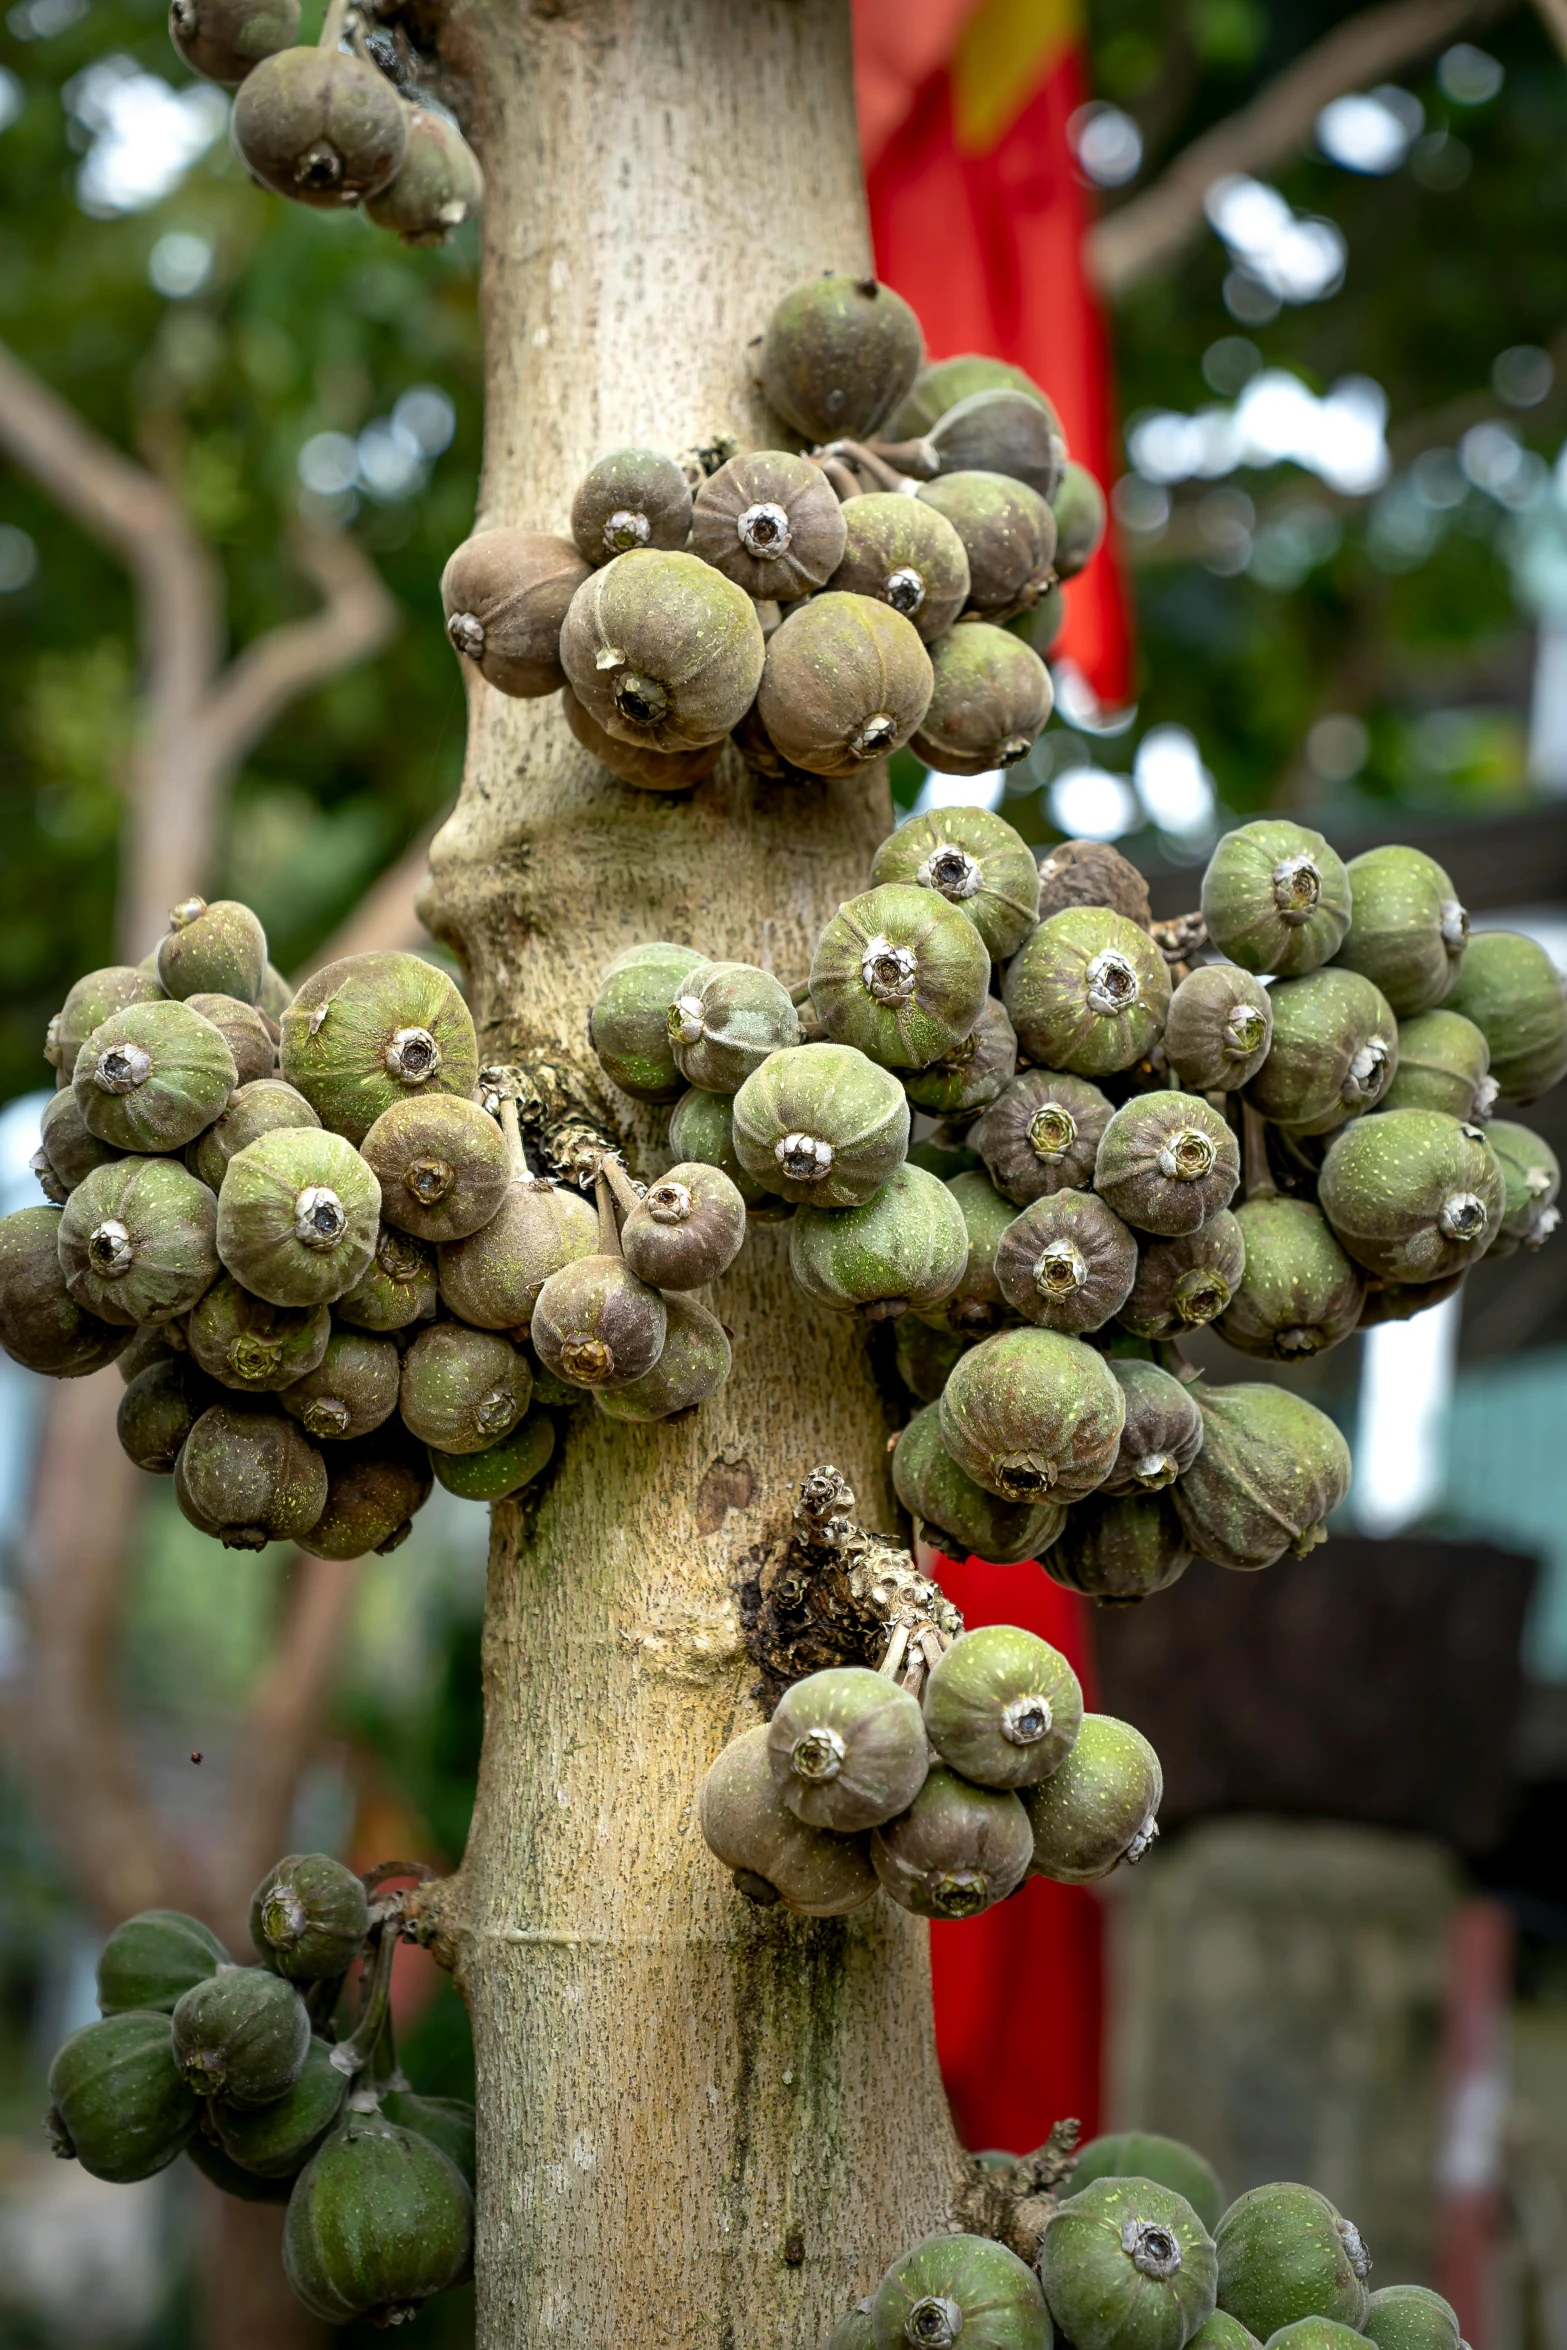 a close up of a bunch of fruit on a tree, hurufiyya, many giant eye balls, plant specimens, on display, award-winning